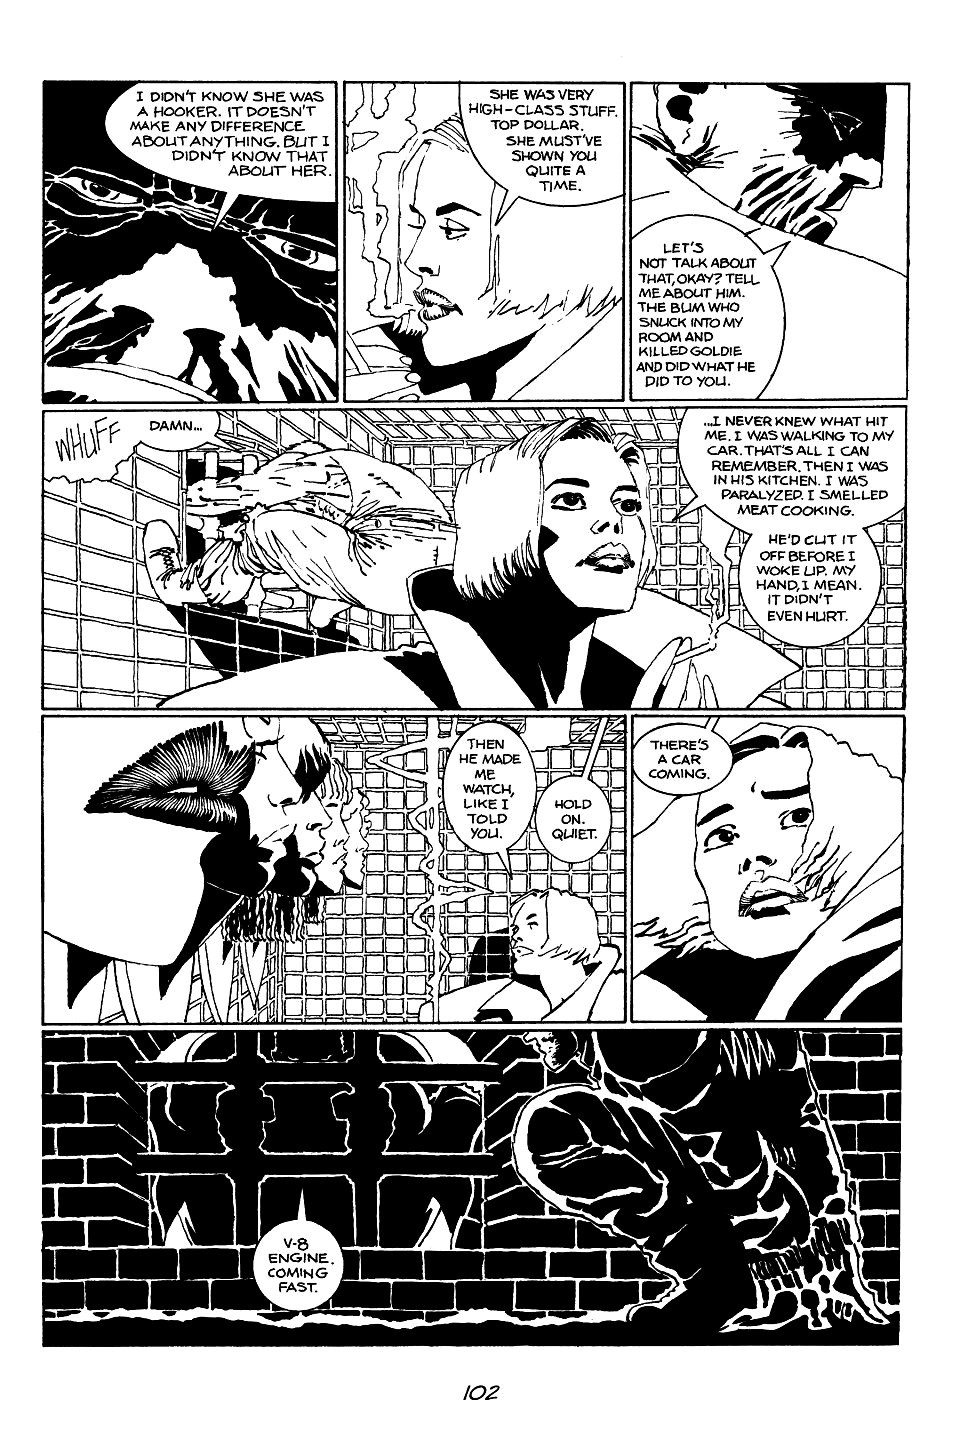 page 102 of sin city 1 the hard goodbye